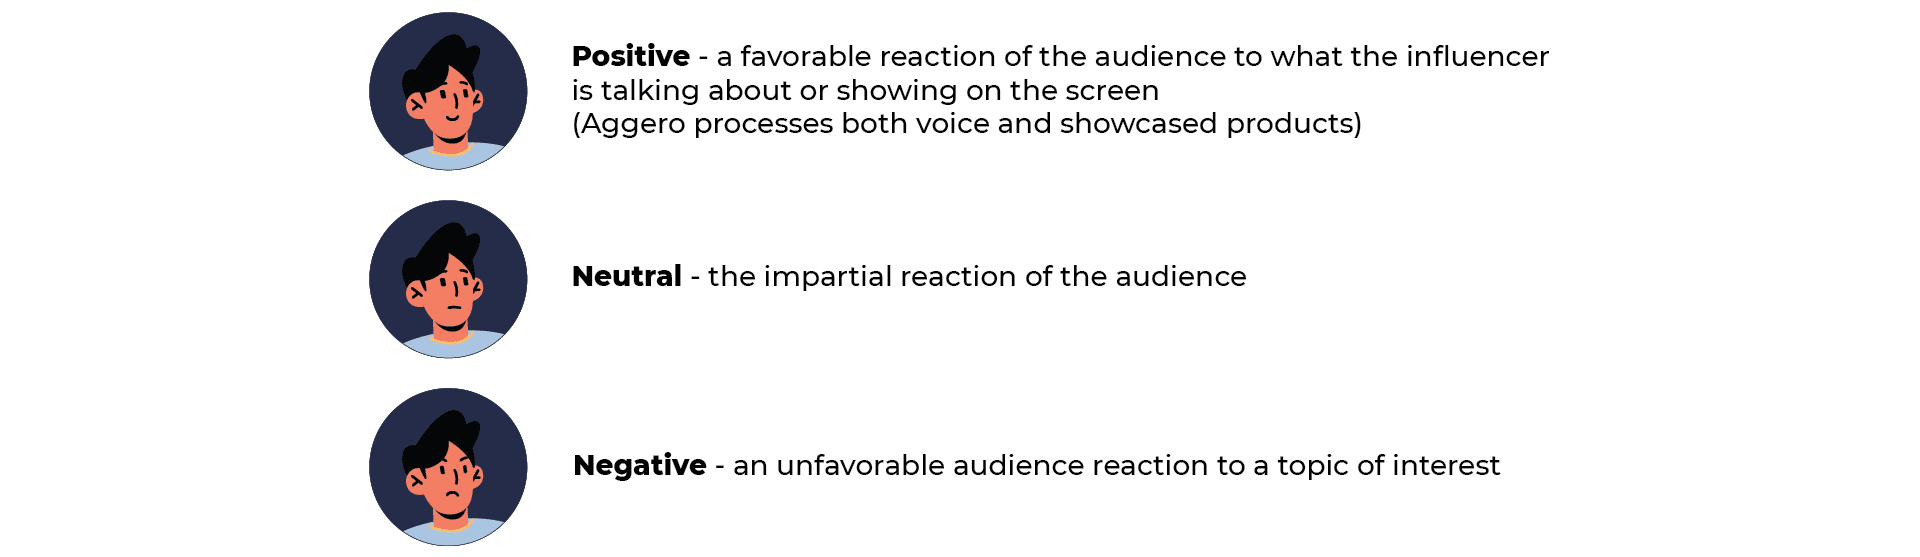 types of social sentiment audience reactions